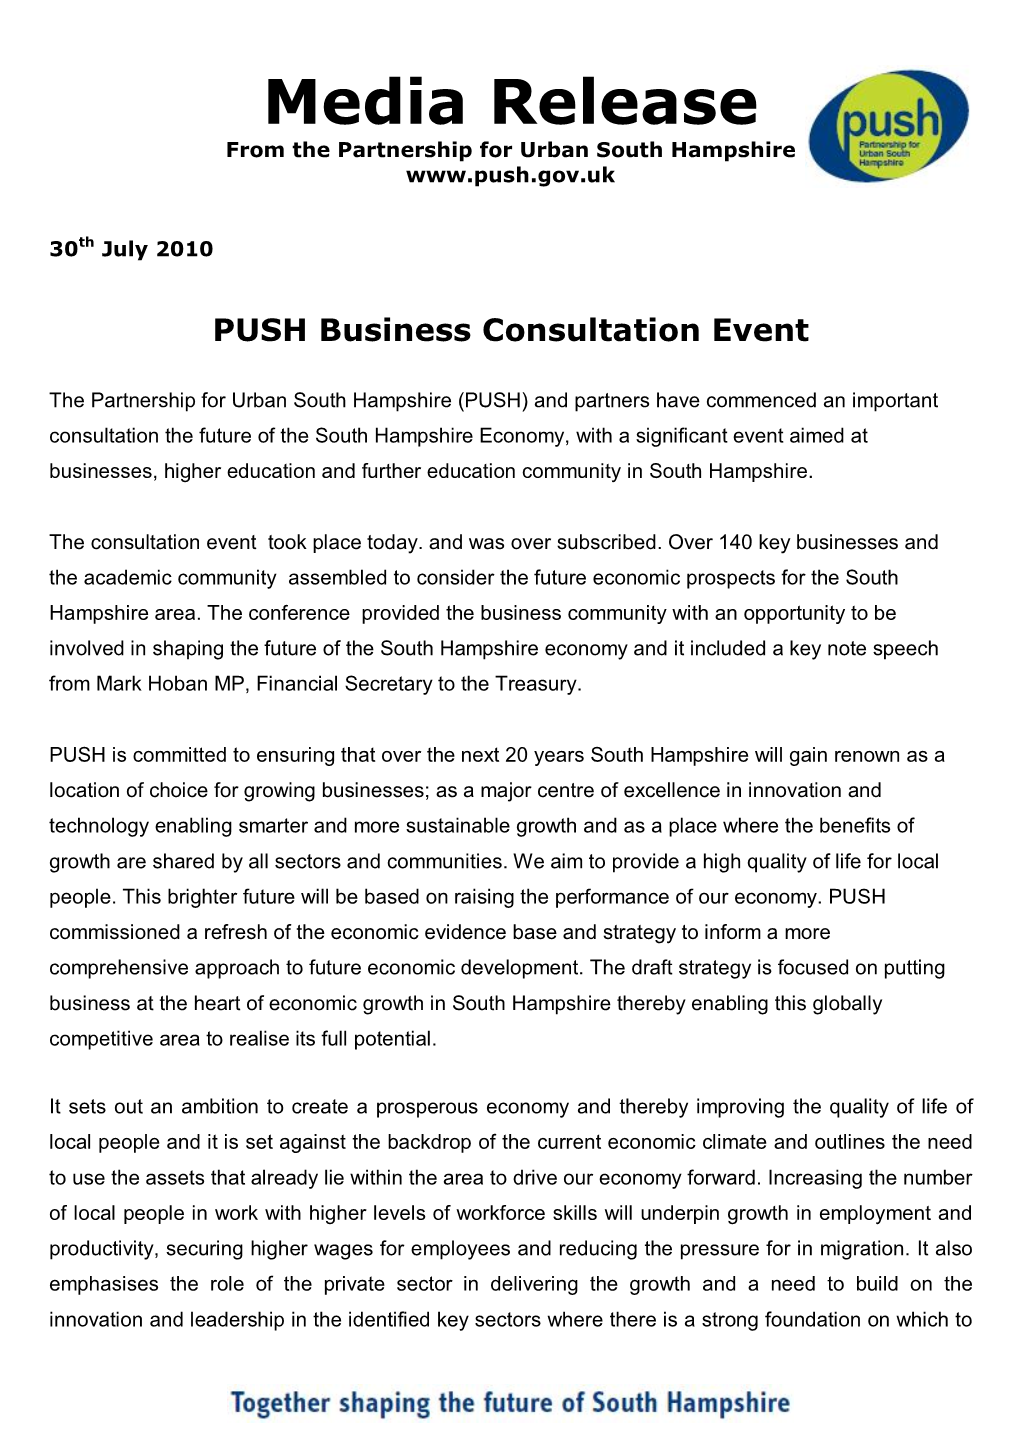 Media Release from the Partnership for Urban South Hampshire